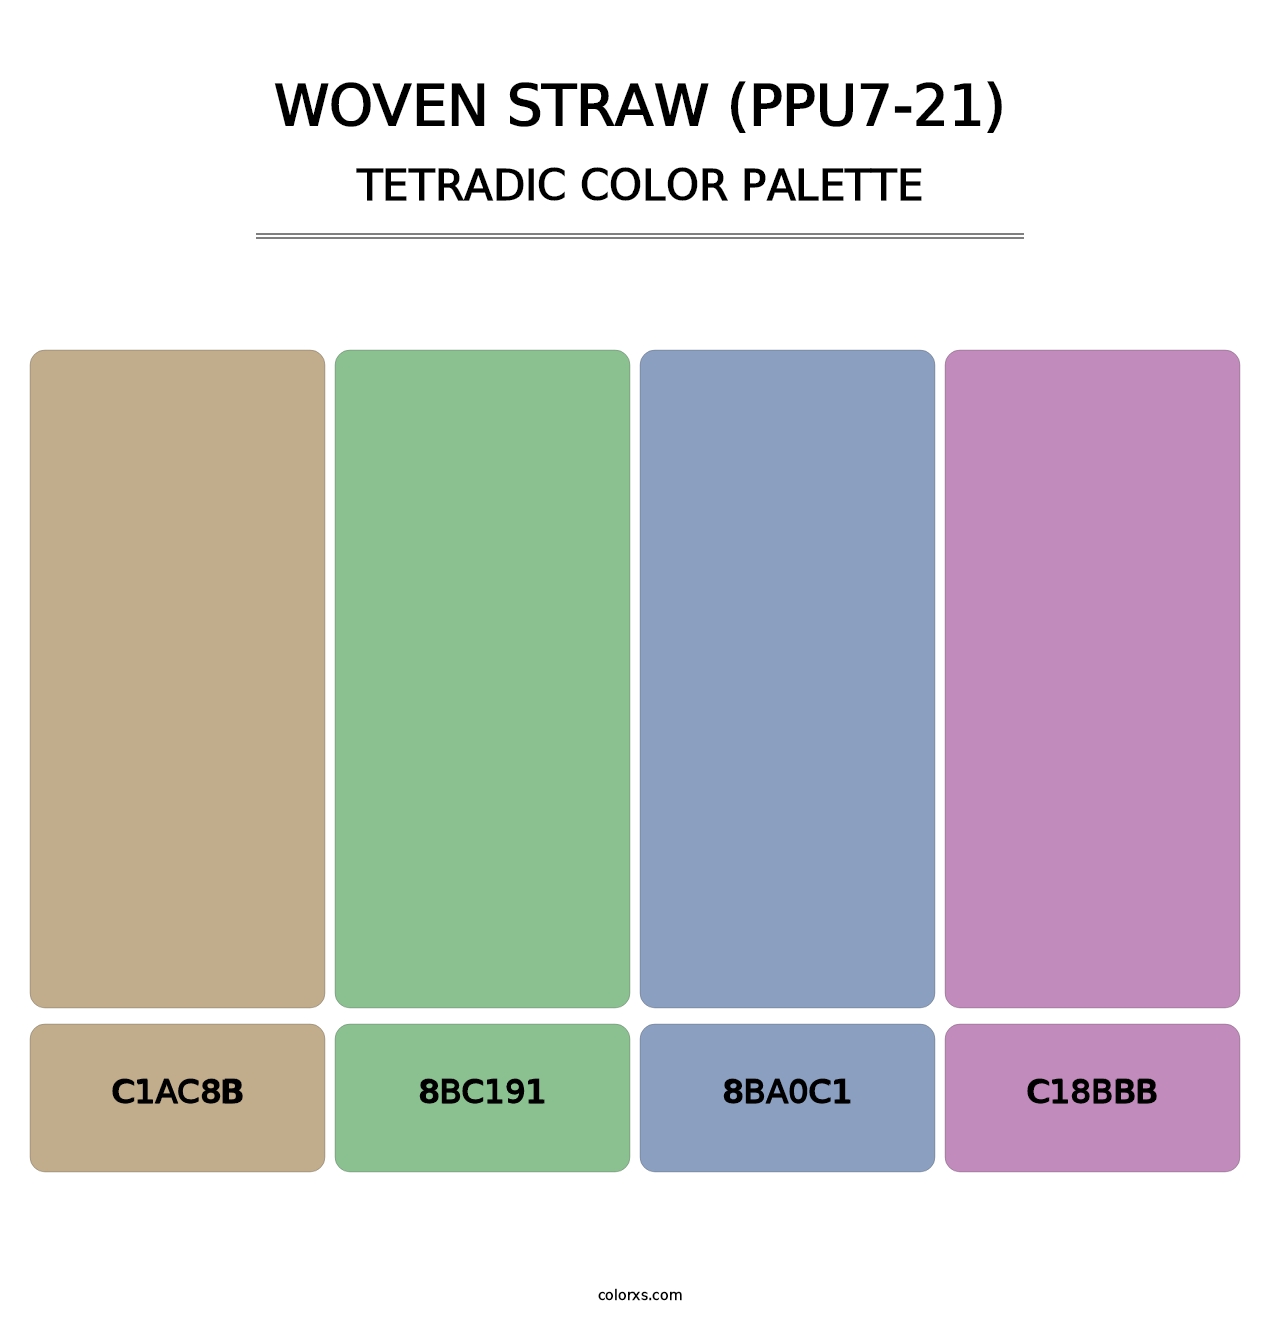 Woven Straw (PPU7-21) - Tetradic Color Palette